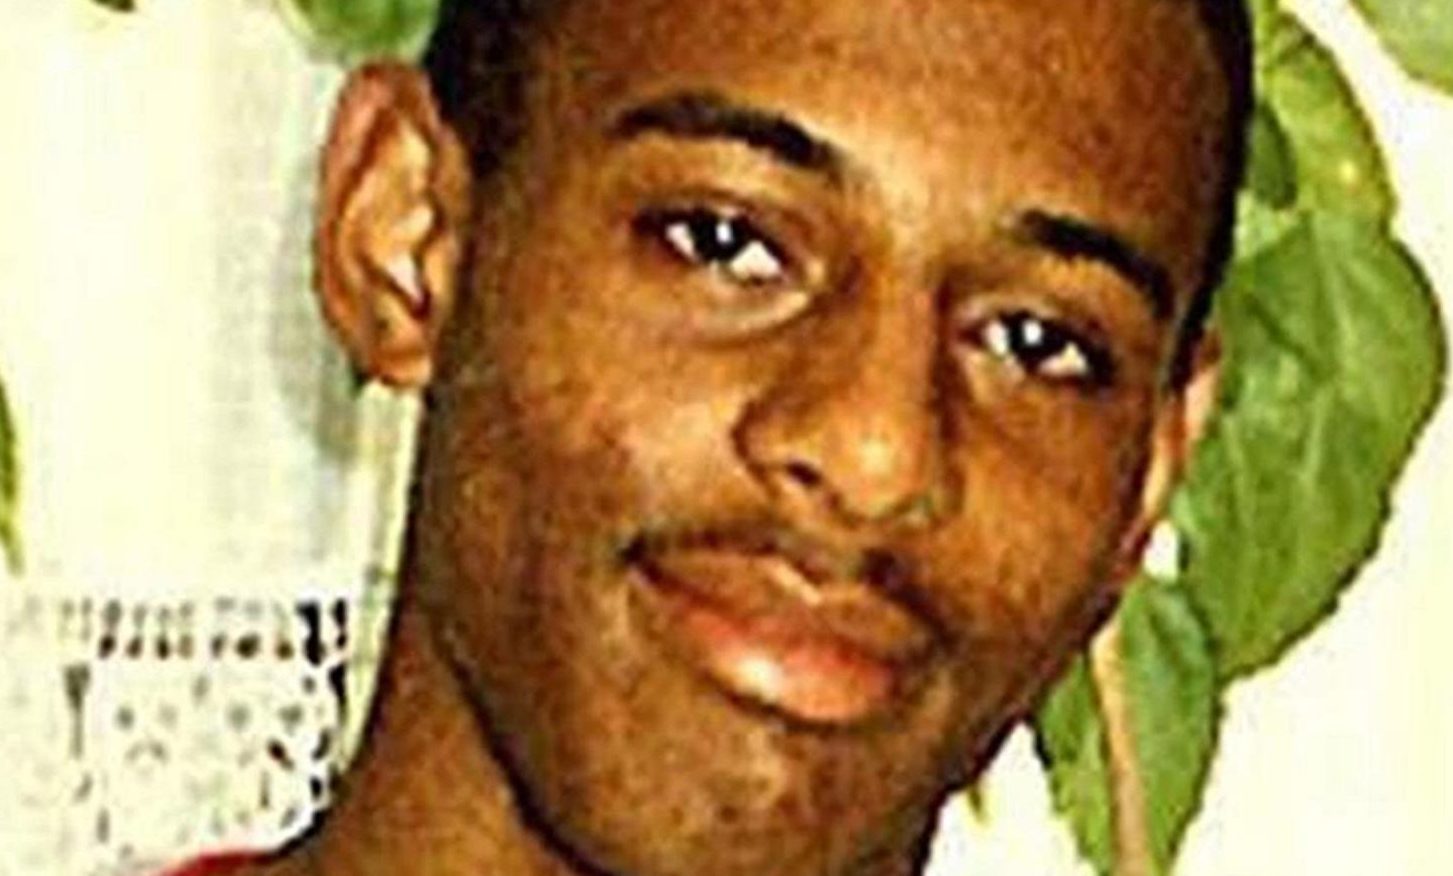 Stephen Lawrence was murdered in 1993.